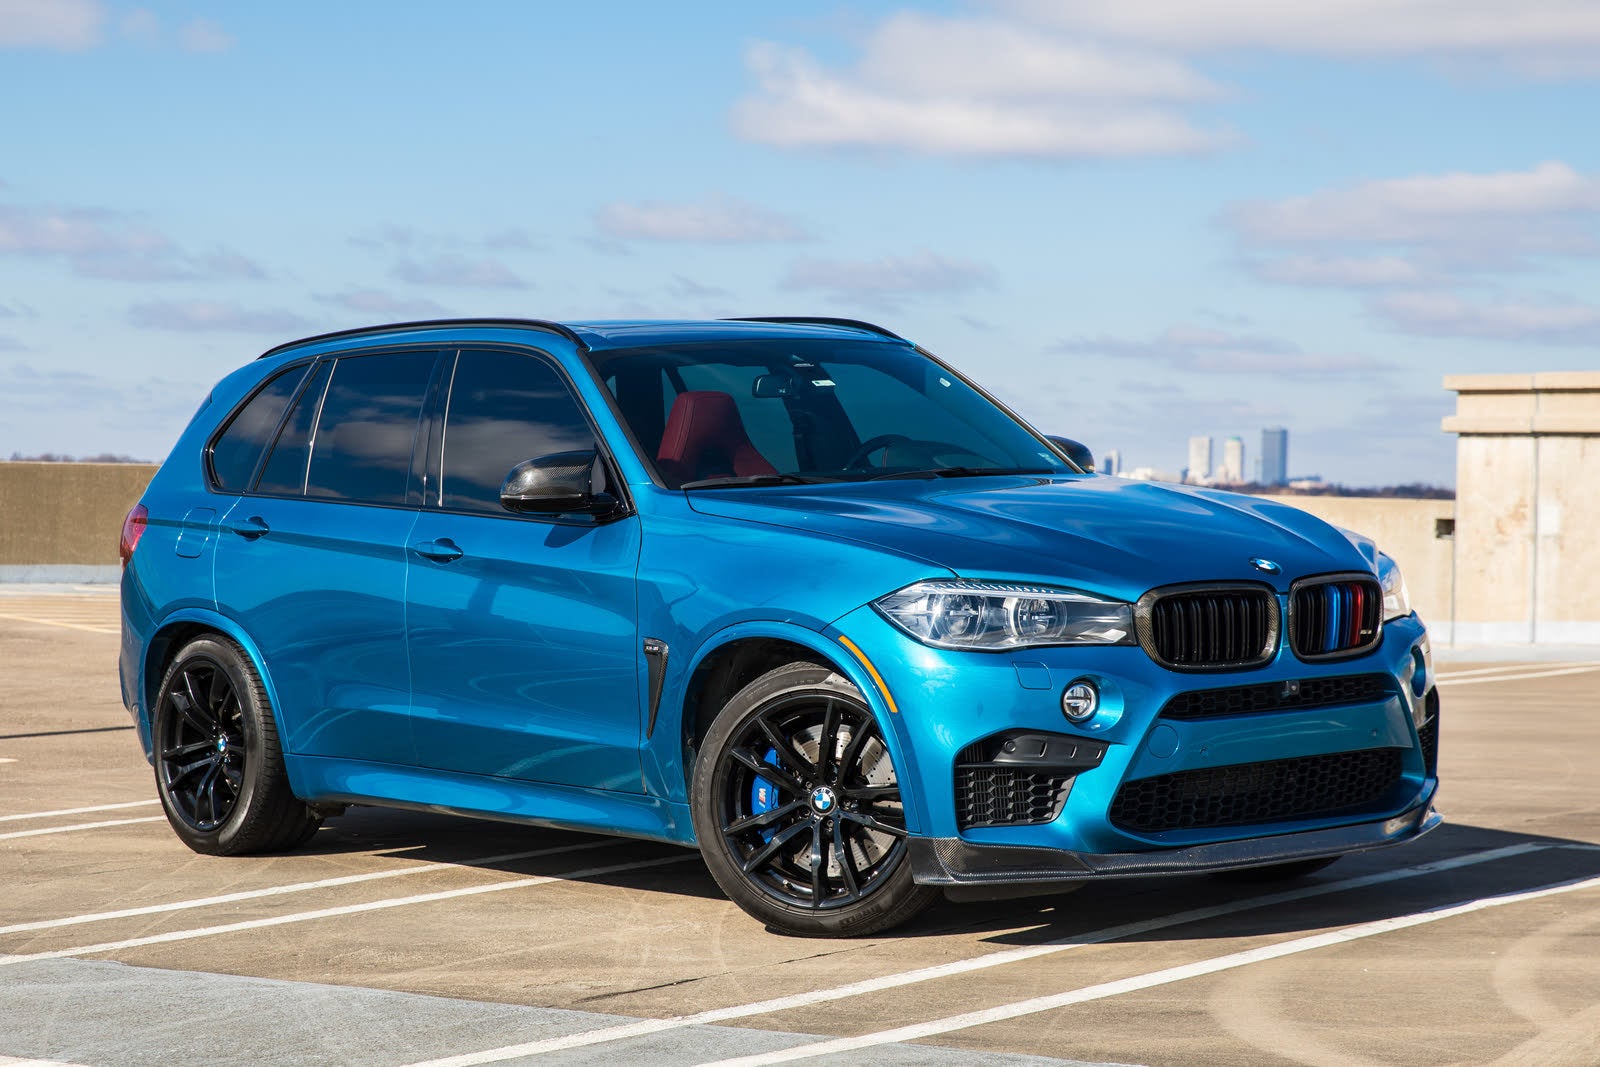 2017 BMW X5 M for Sale in Toronto, ON - CarGurus.ca